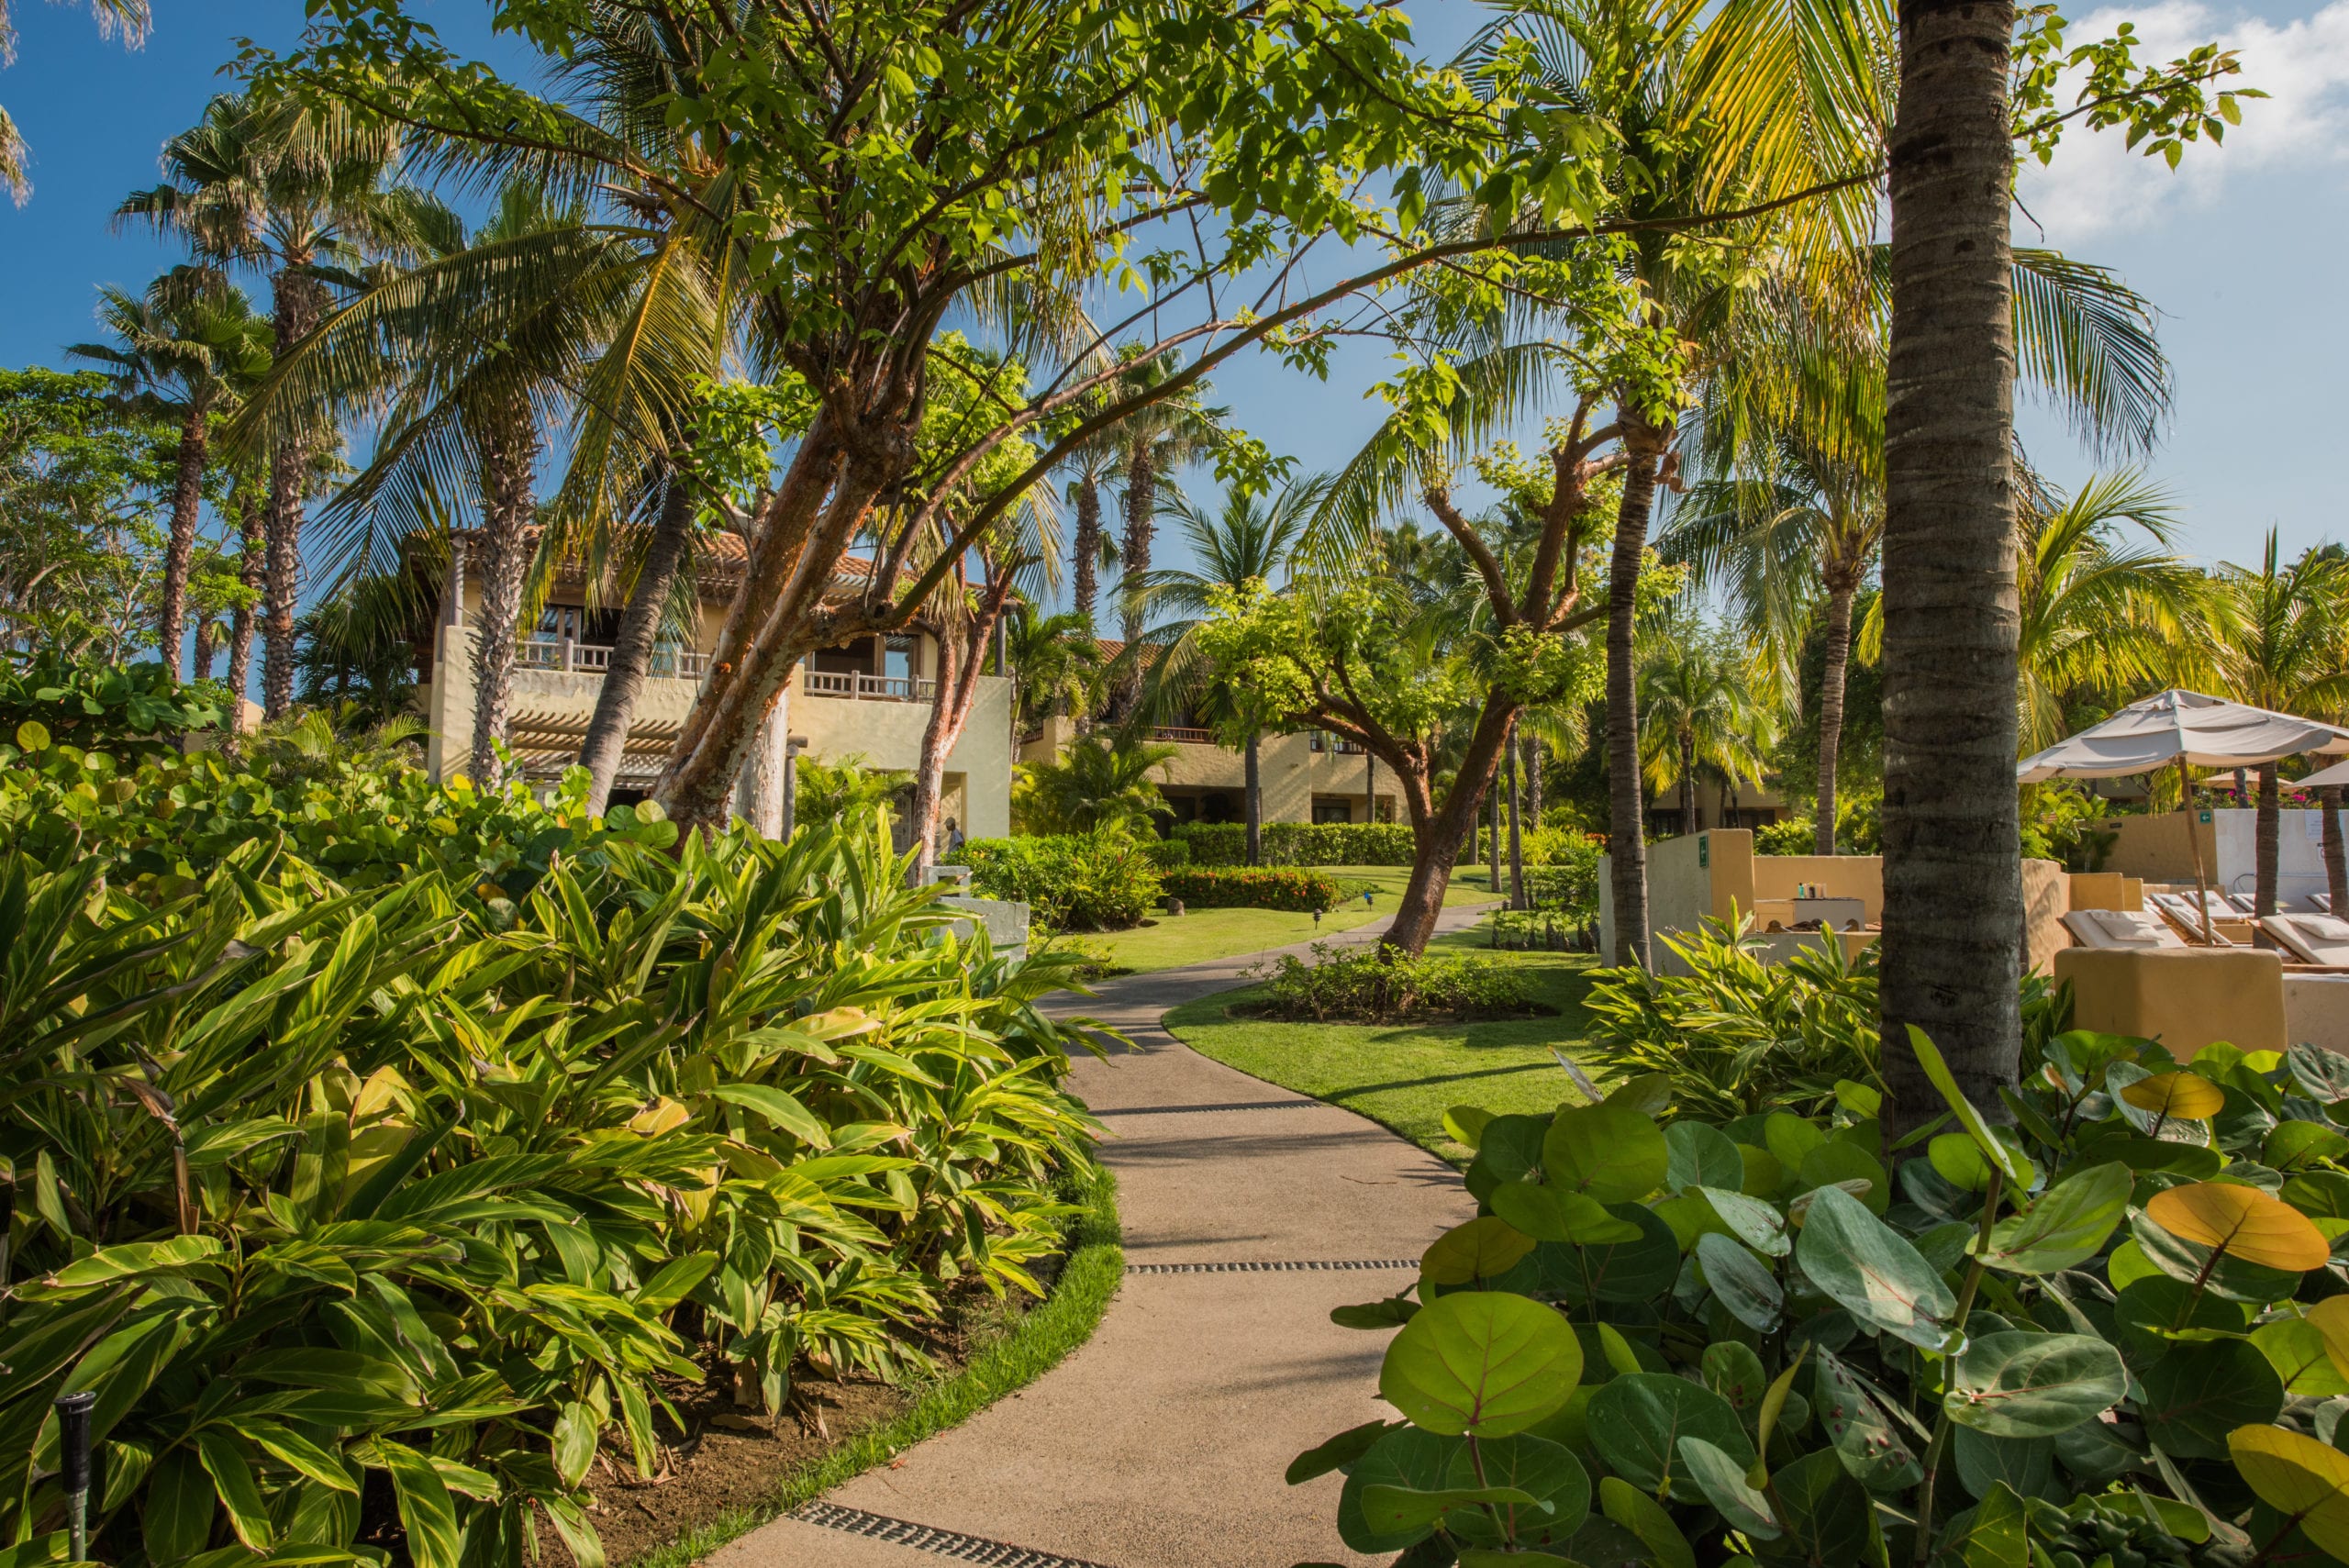 IU St Regis Walkway with green foliage, trees and palm trees